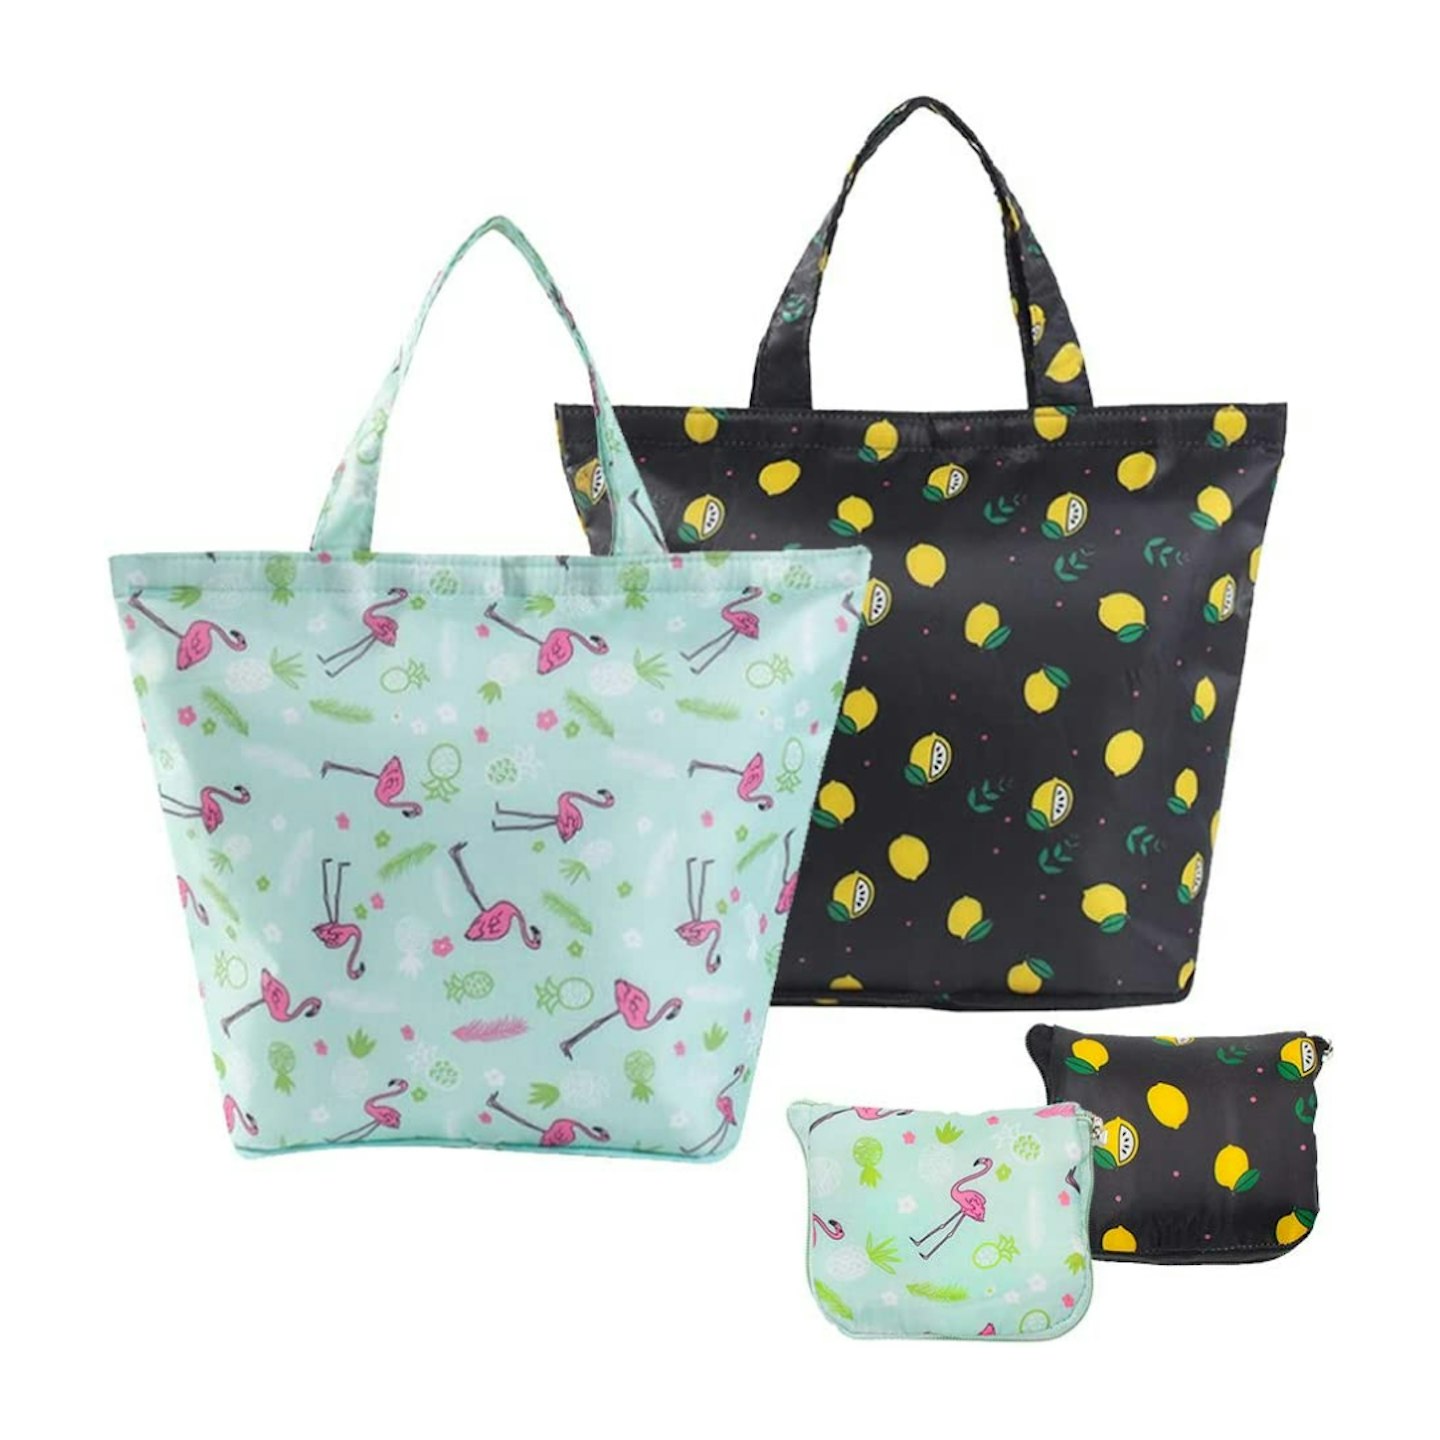 SnailGarden 2 Pcs Insulated Thermal Lunch Bag